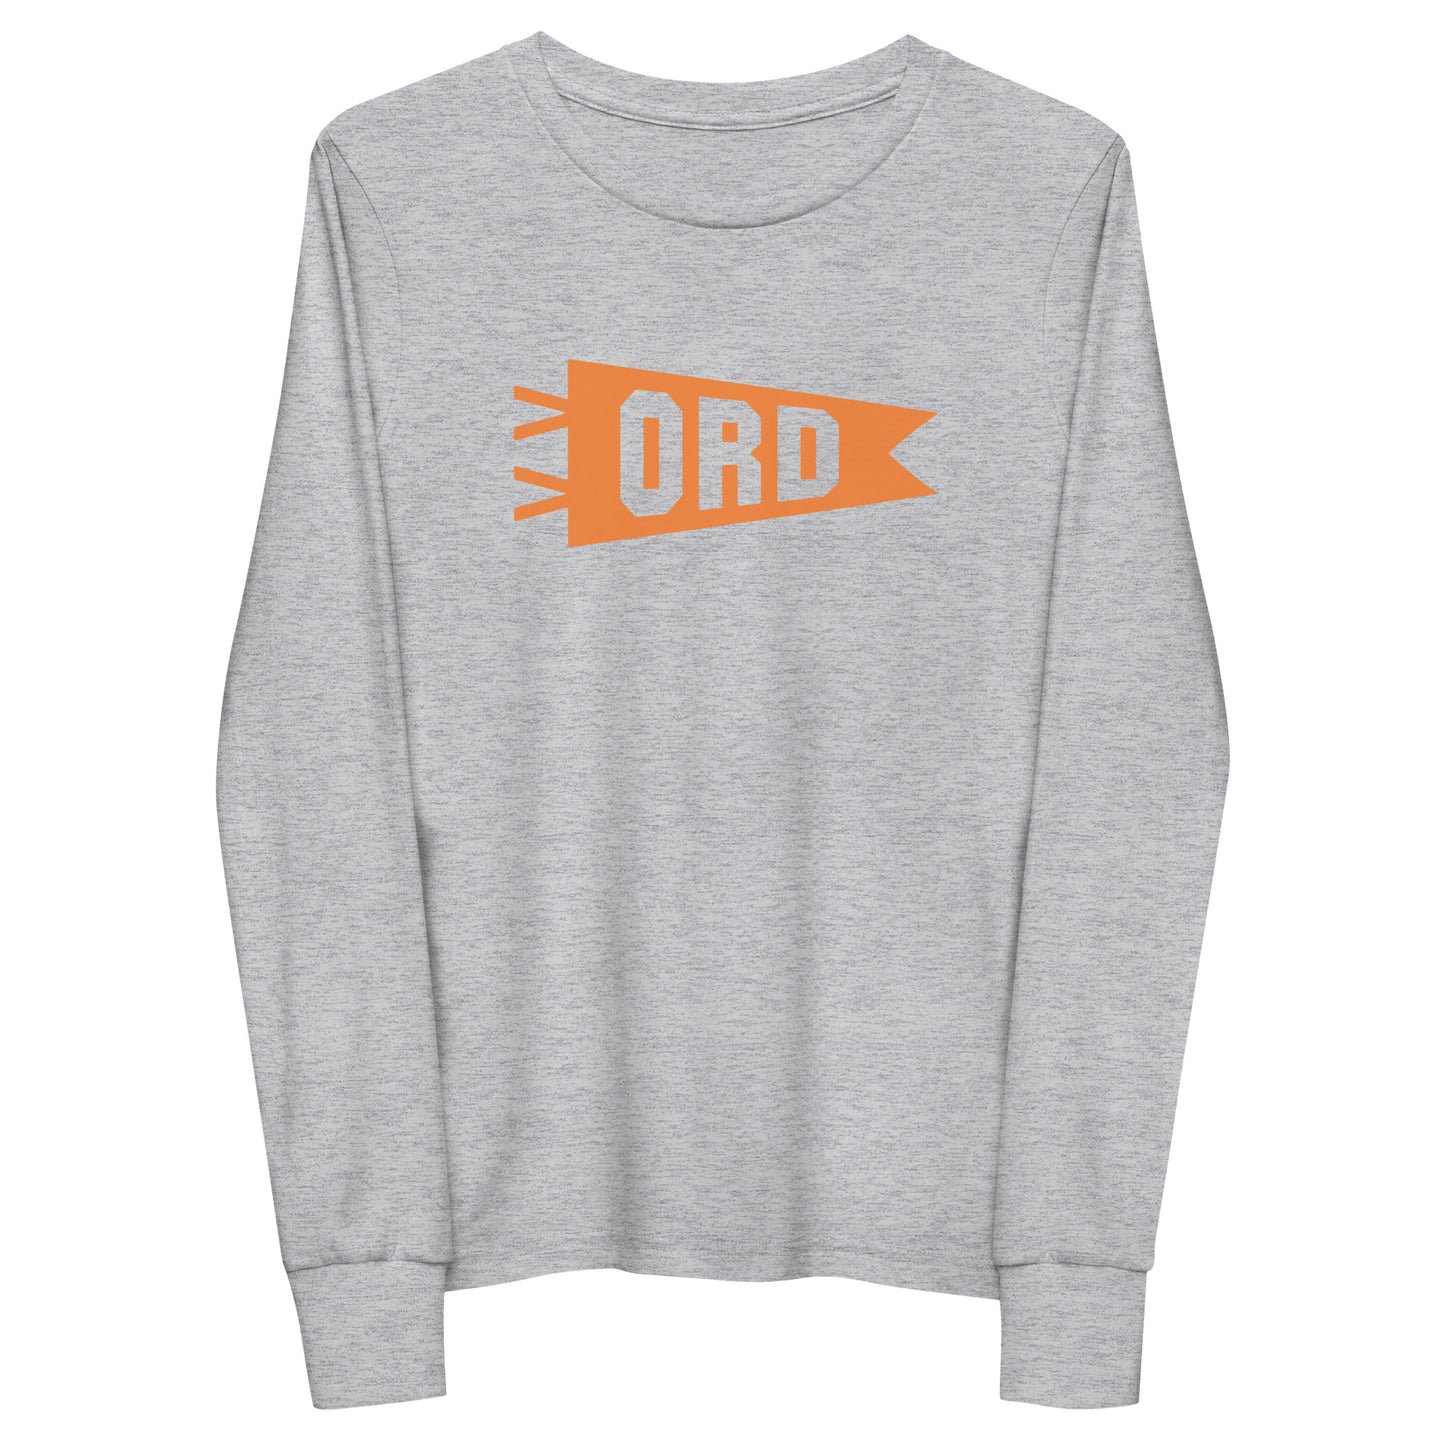 Kid's Airport Code Long-Sleeve Tee - Orange Graphic • ORD Chicago • YHM Designs - Image 11